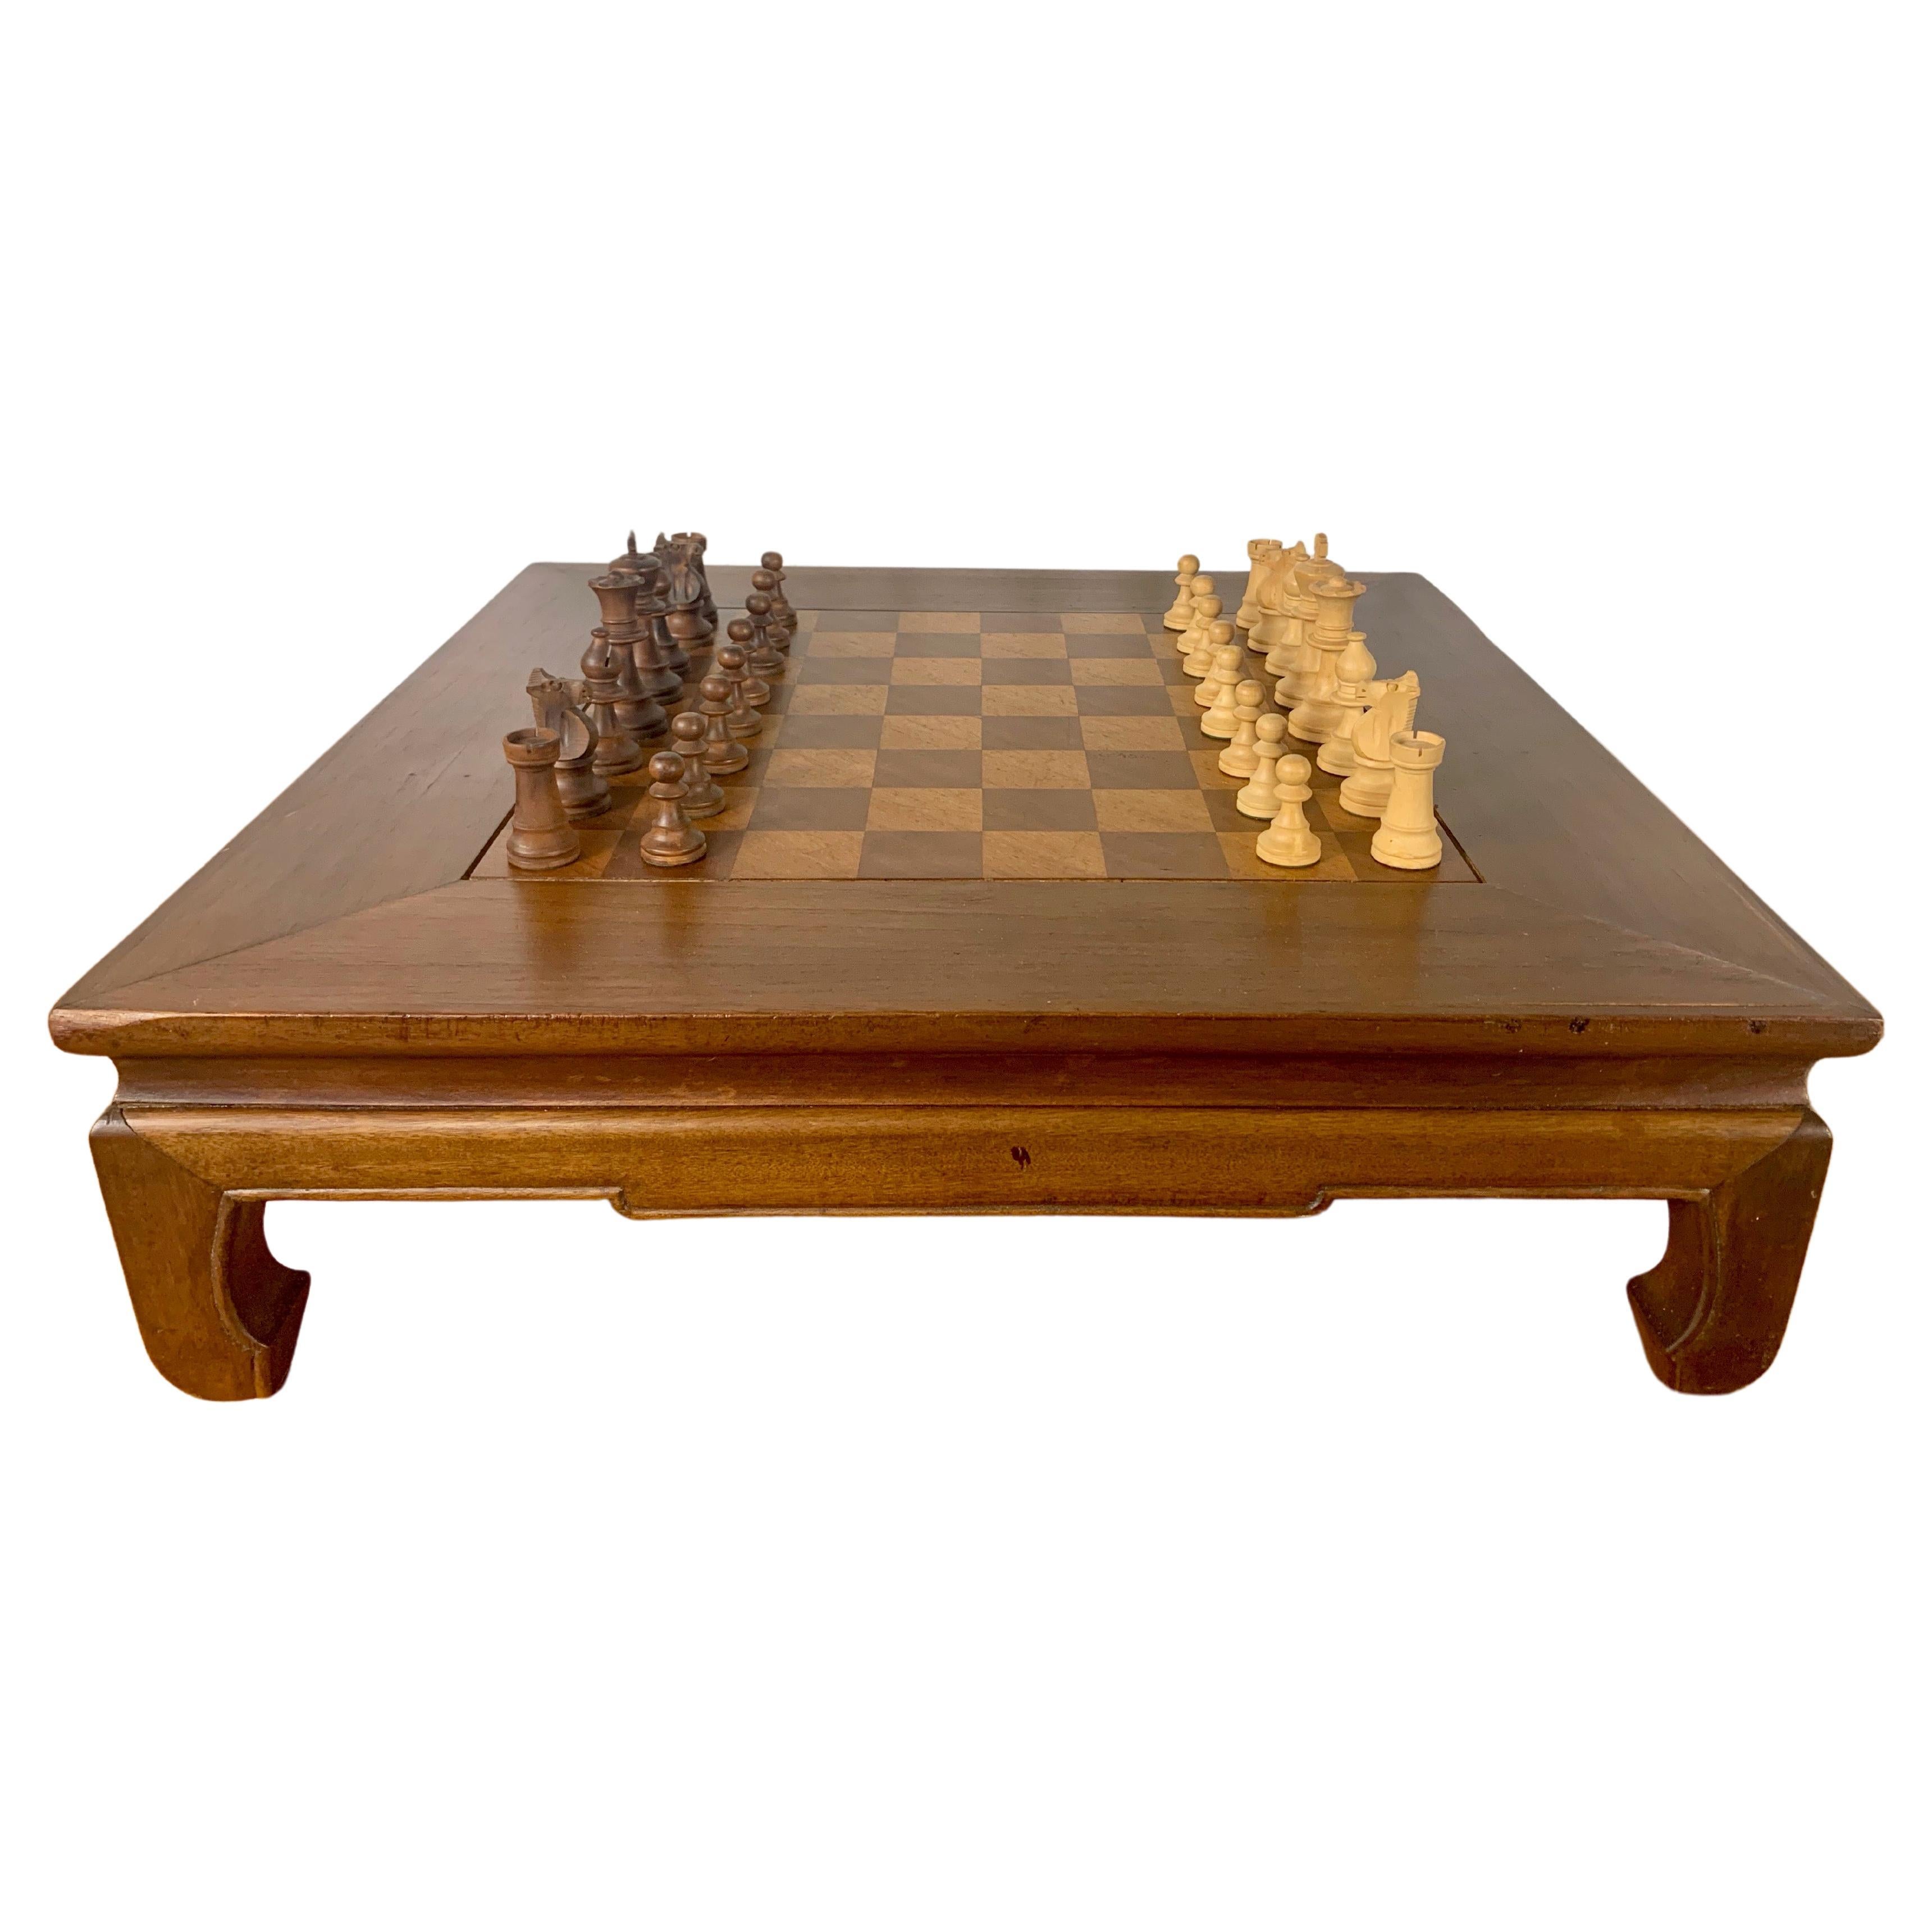 Vintage Asian Low Chess Table